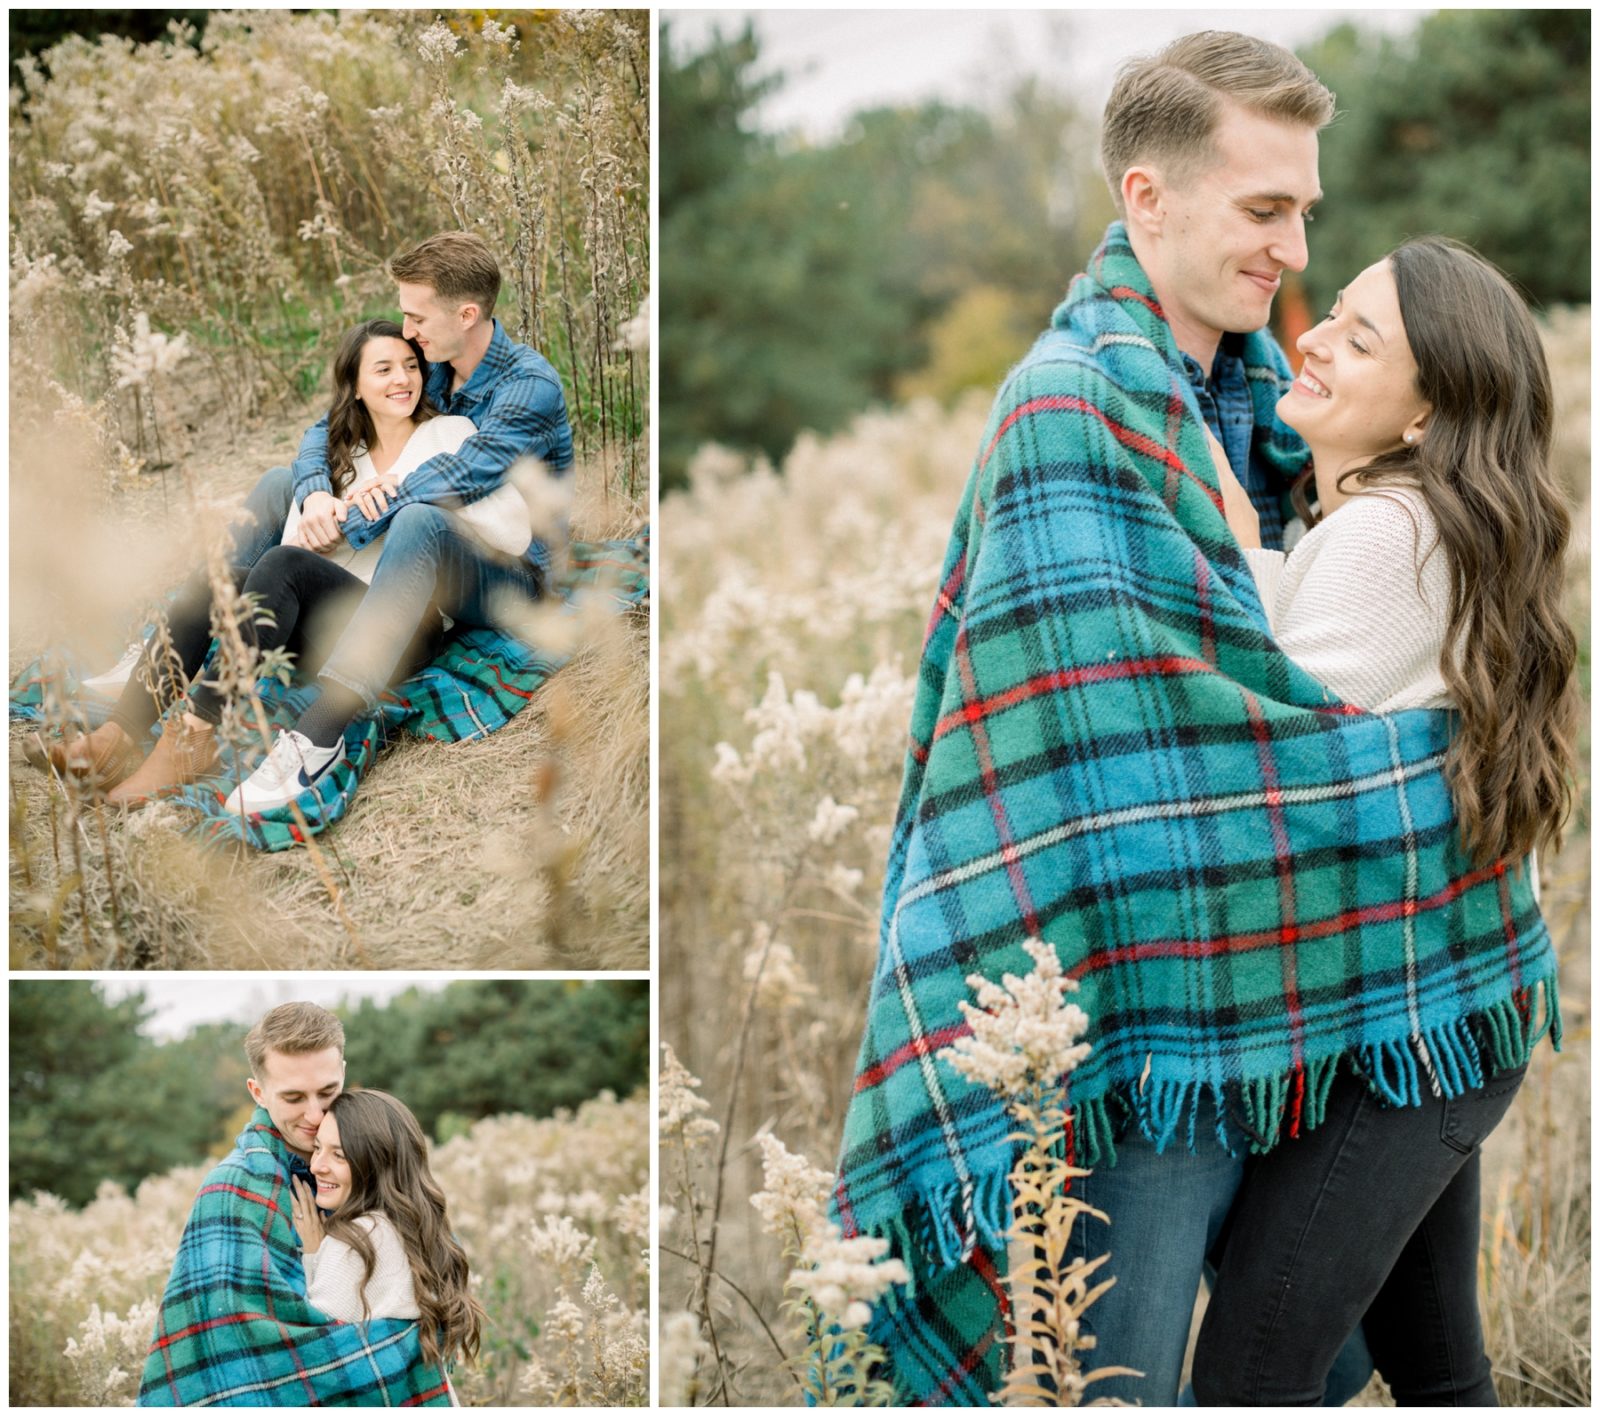 Composition of photos showing affectionate young couple together, smiling, hugging. They are on a dry flower field and are using a blanket.